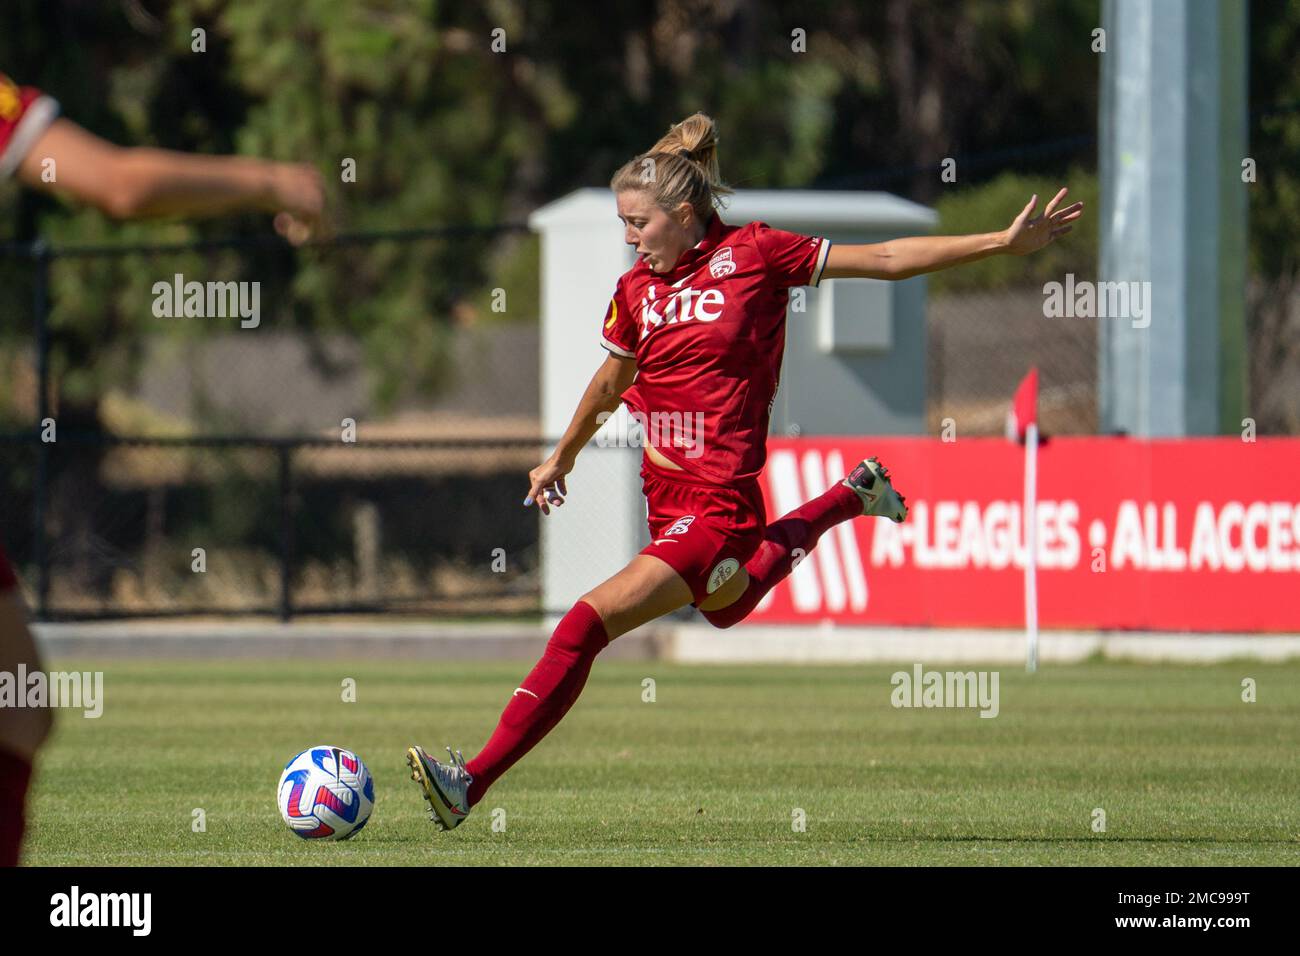 January 21, 2023, Adelaide, South Australia, Australia: Adelaide, South  Australia, January 21st 2023: Maruschka Waldus (19 Adelaide United) kicks  the ball during the Liberty A-League game between Adelaide United and  Melbourne Victory